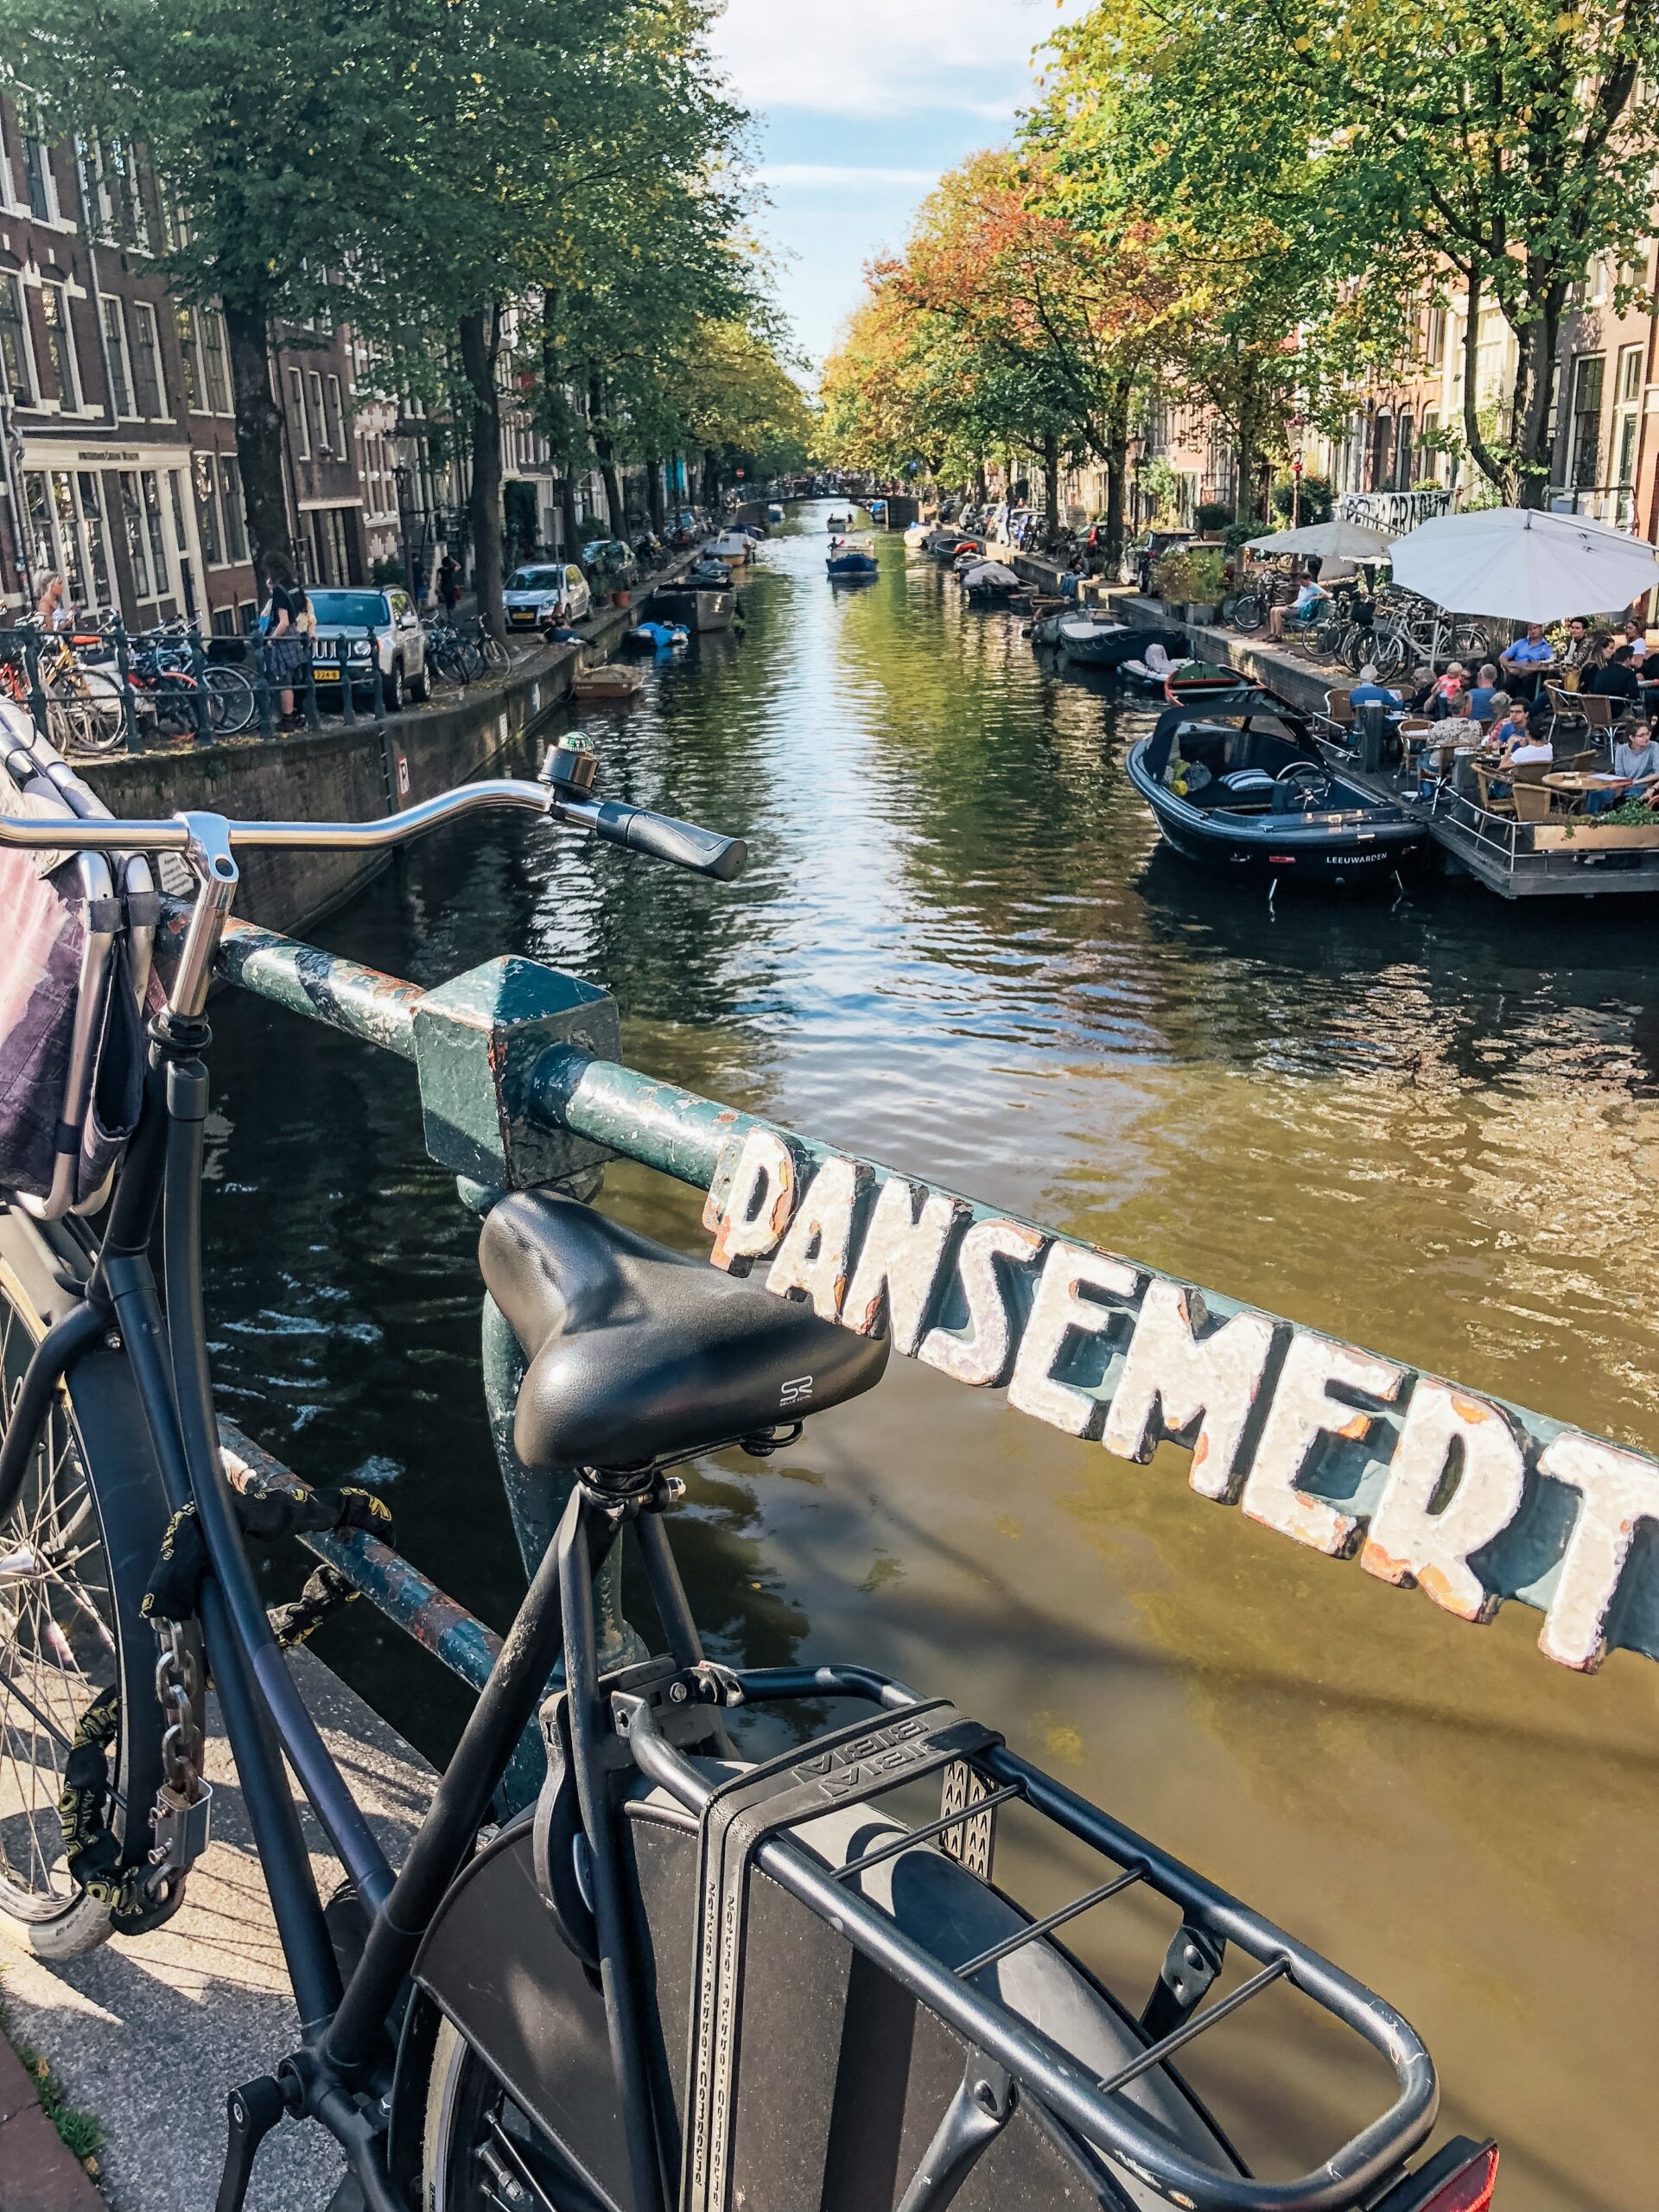 eat, breathe and fall love in: amsterdam - eat.breathe.love